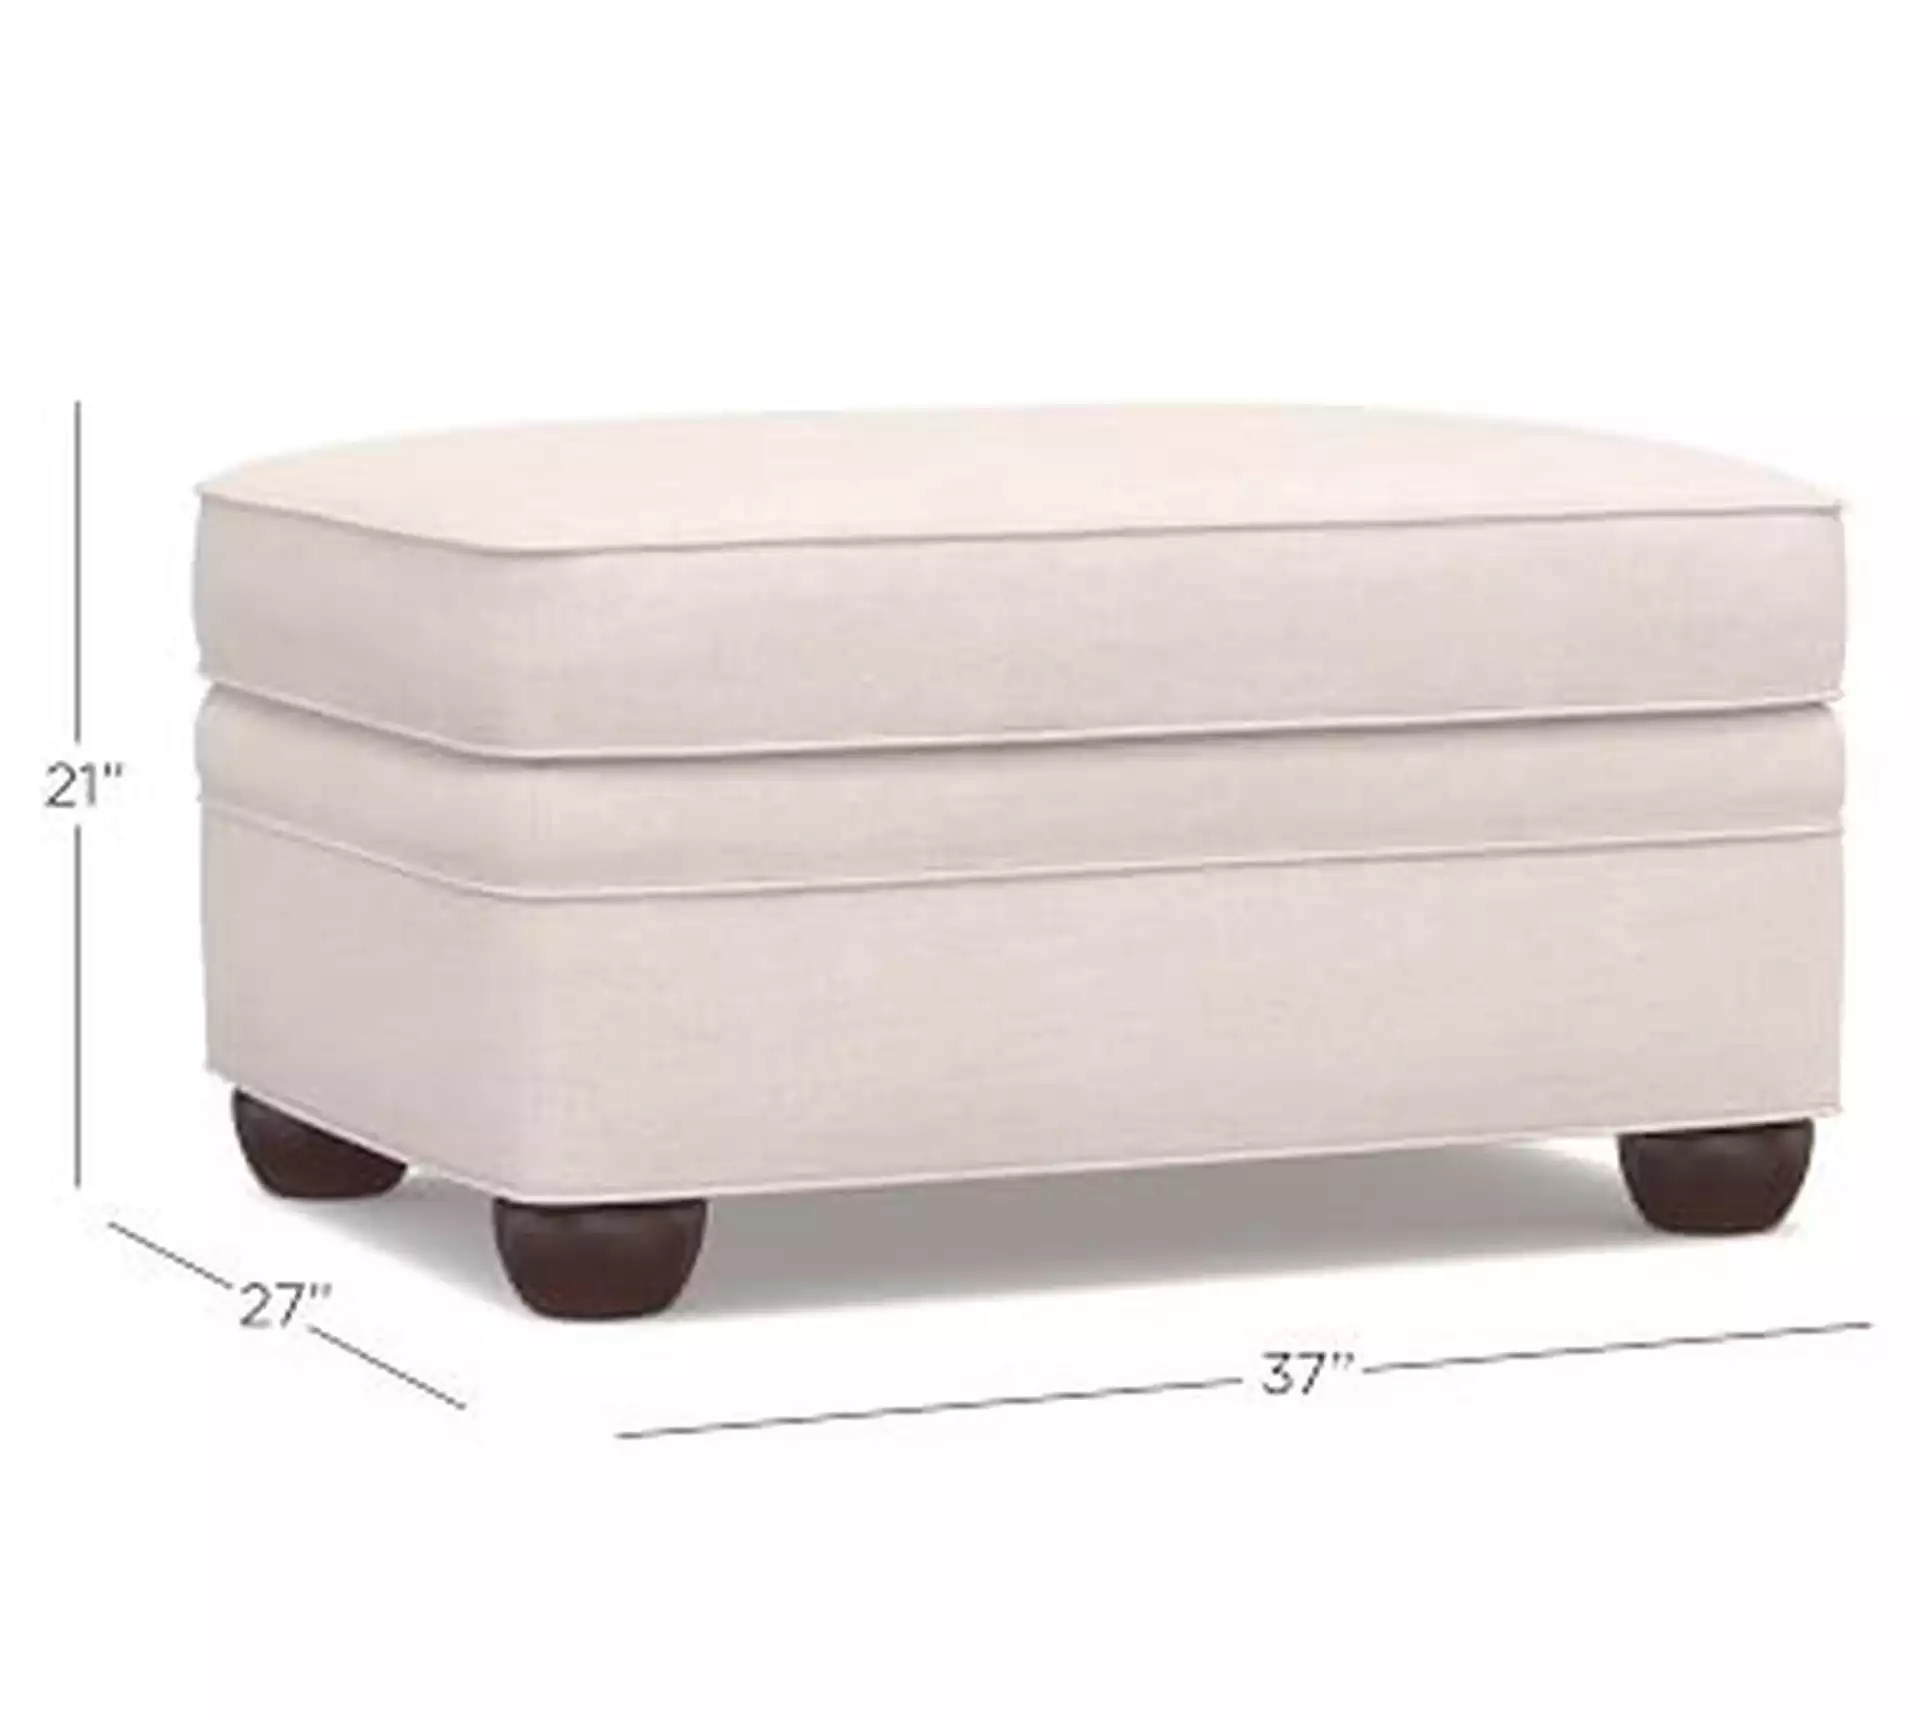 Chesterfield Roll Arm Upholstered Ottoman, Polyester Wrapped Cushions, Performance Heathered Basketweave Alabaster White